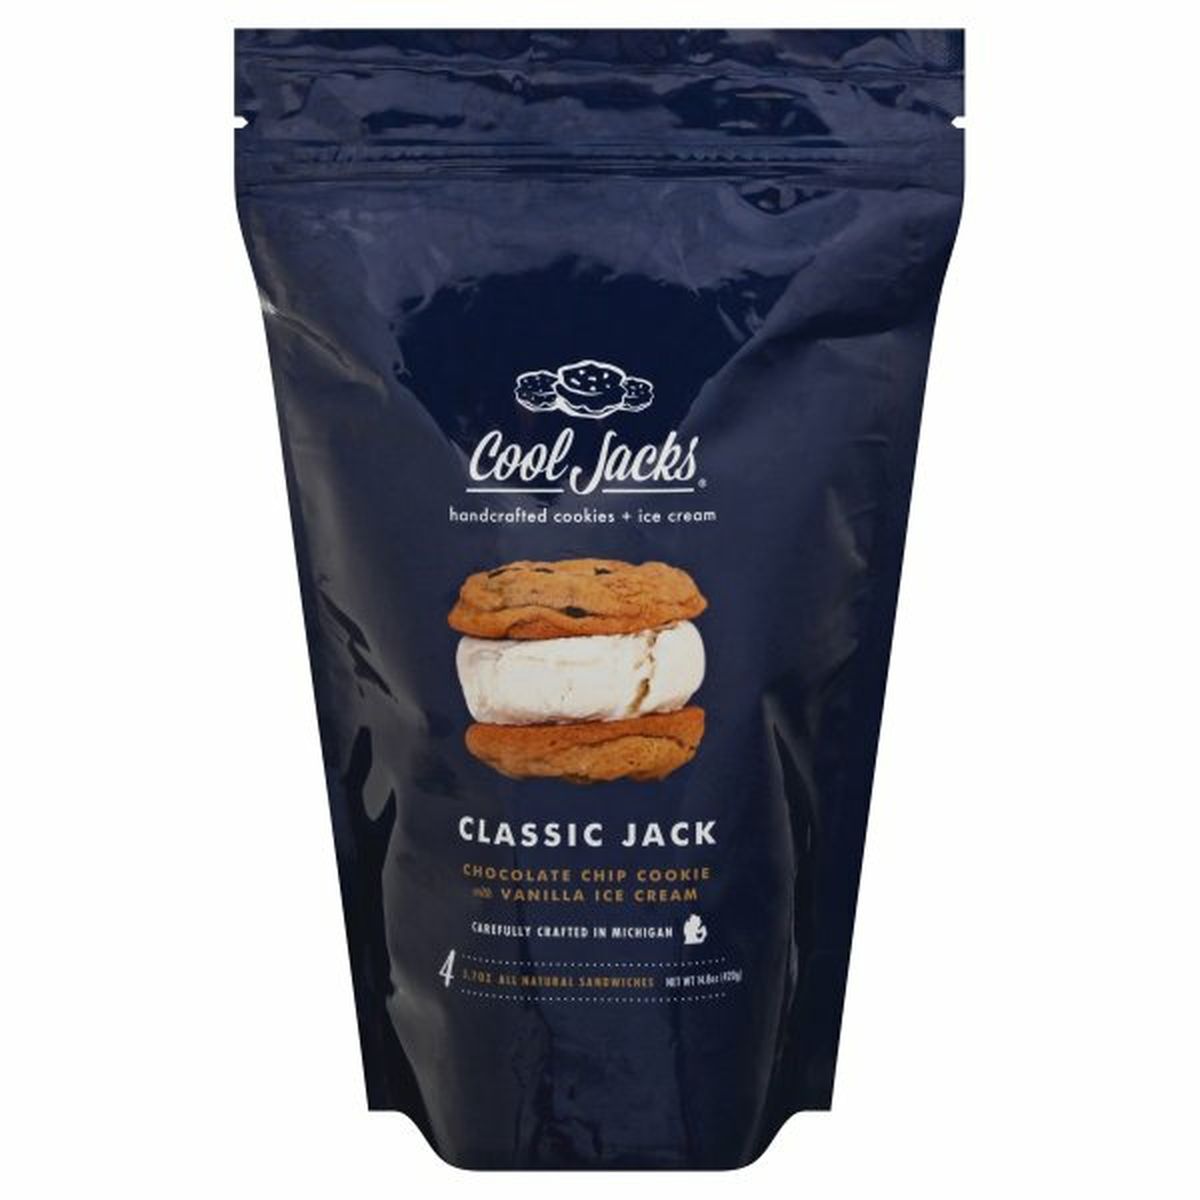 Calories in Cool Jacks Ice Cream Sandwiches, Classic Jack